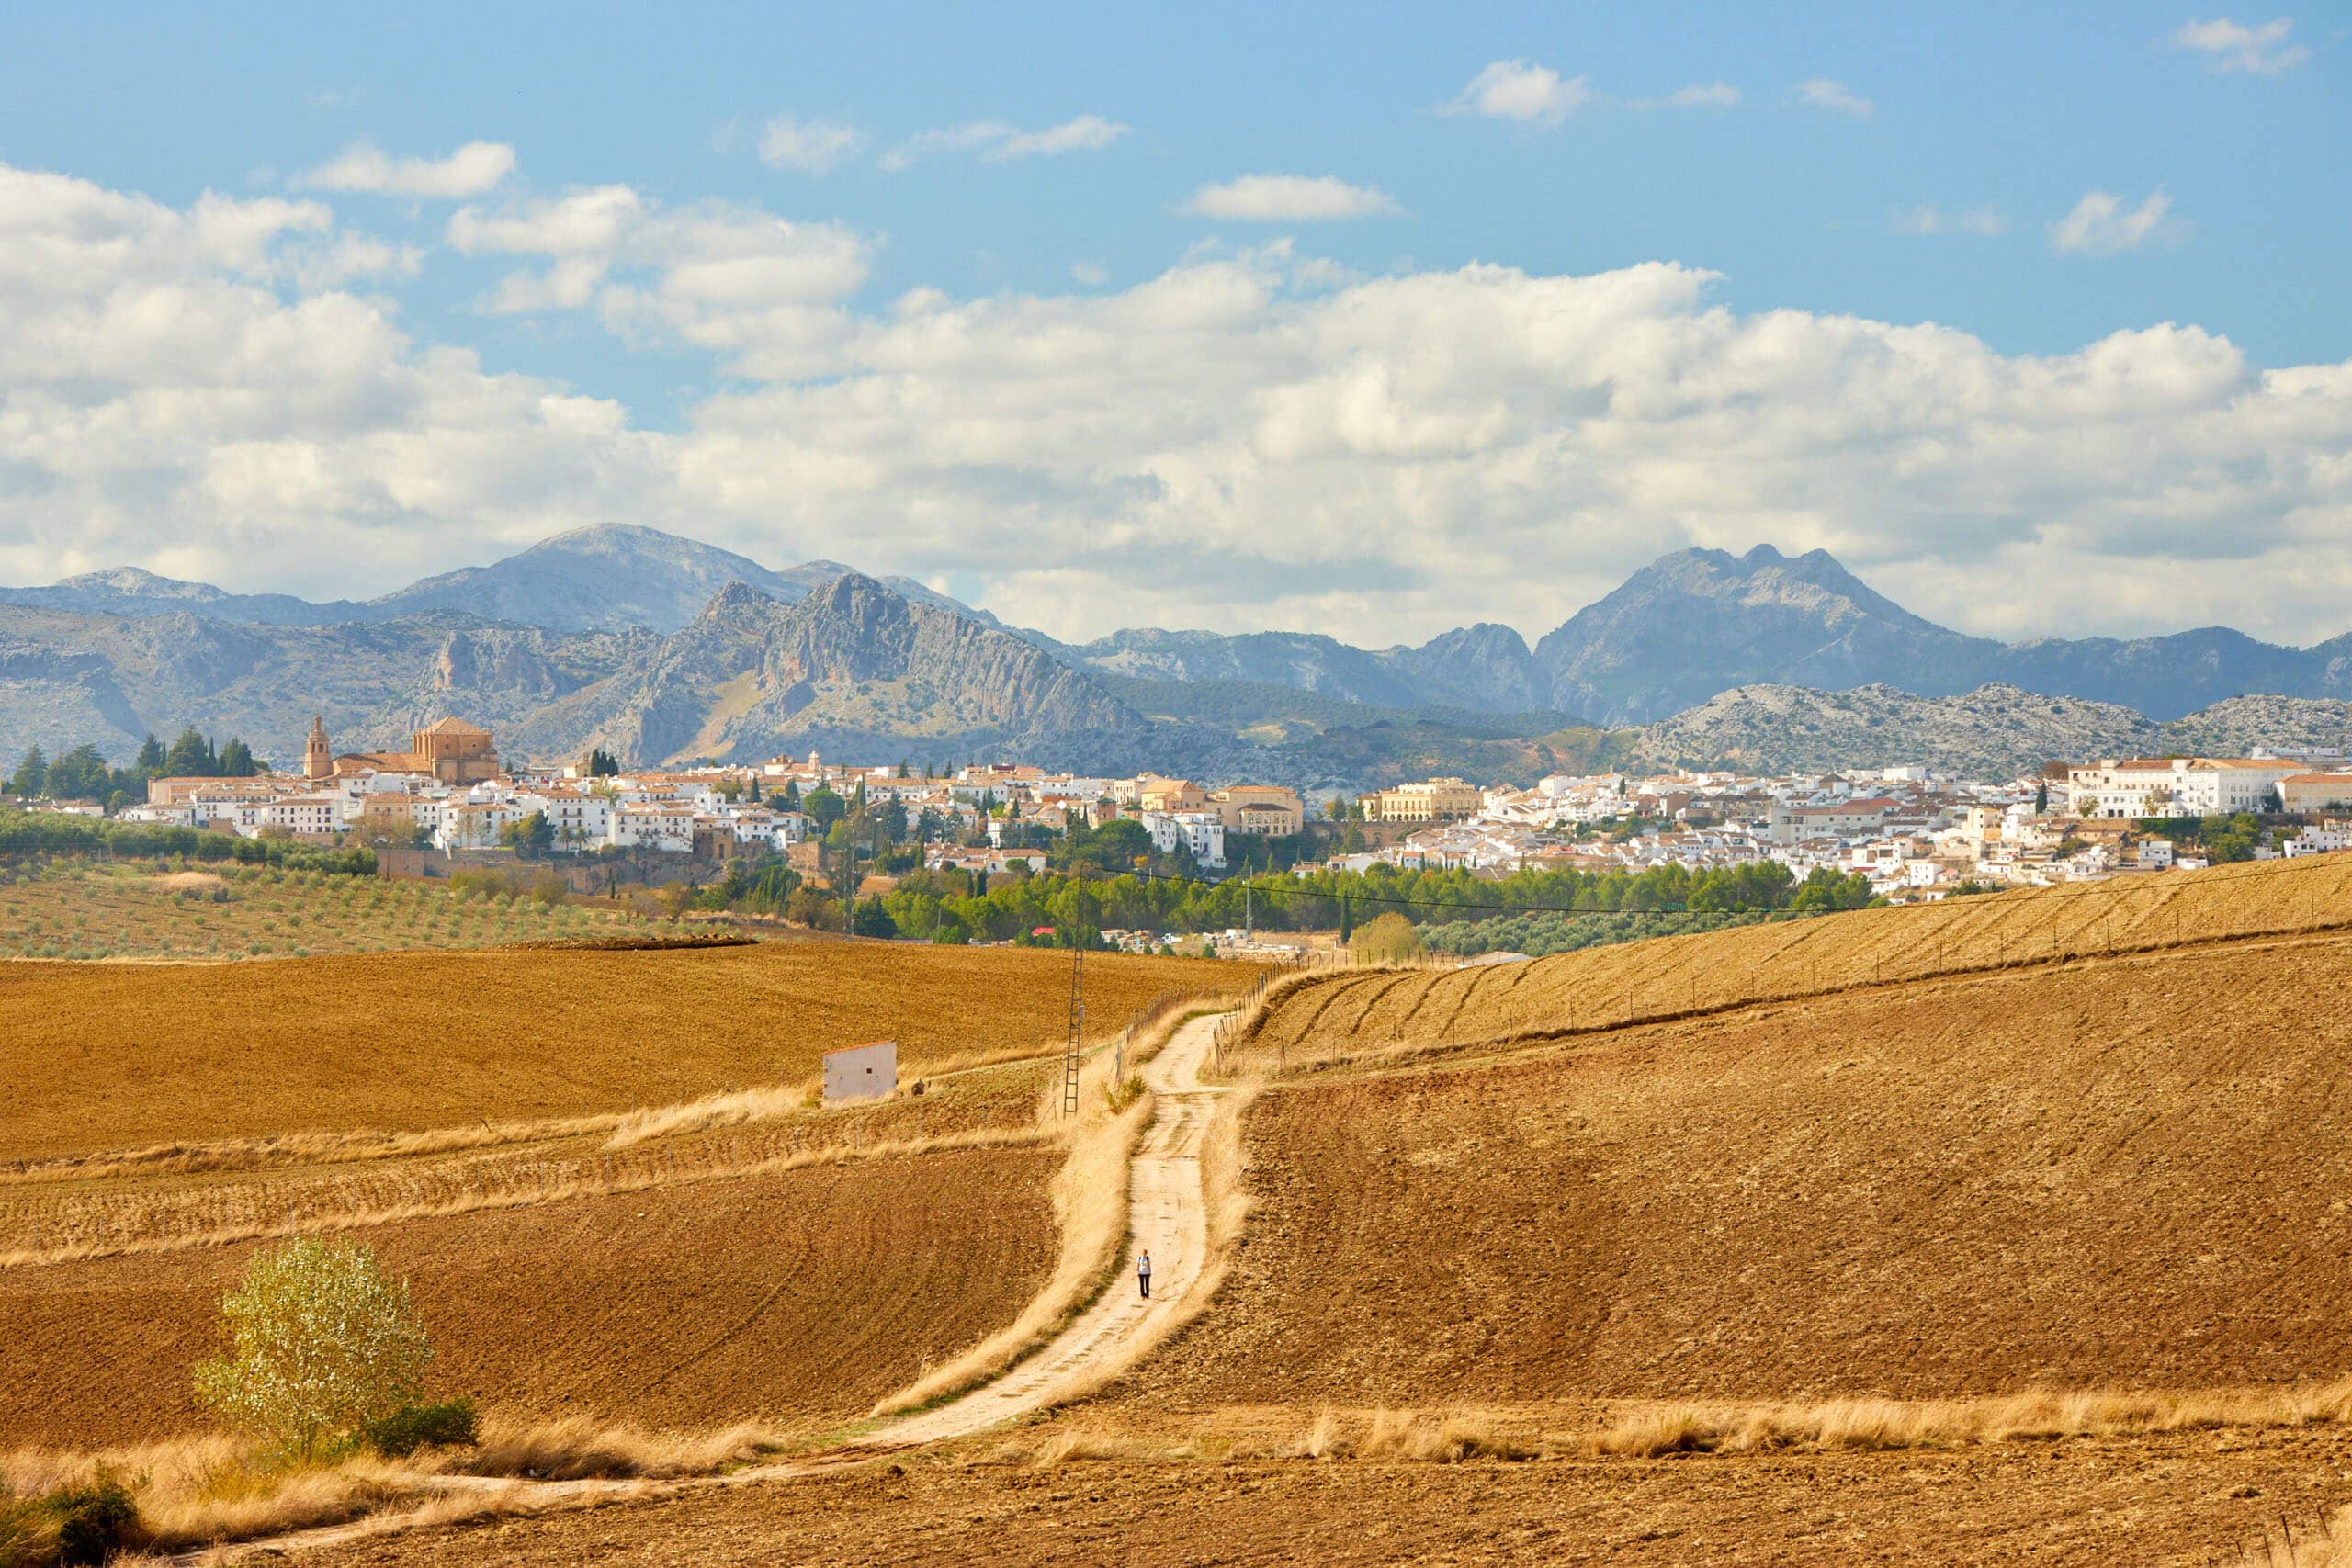 Skyline of Ronda from a distance